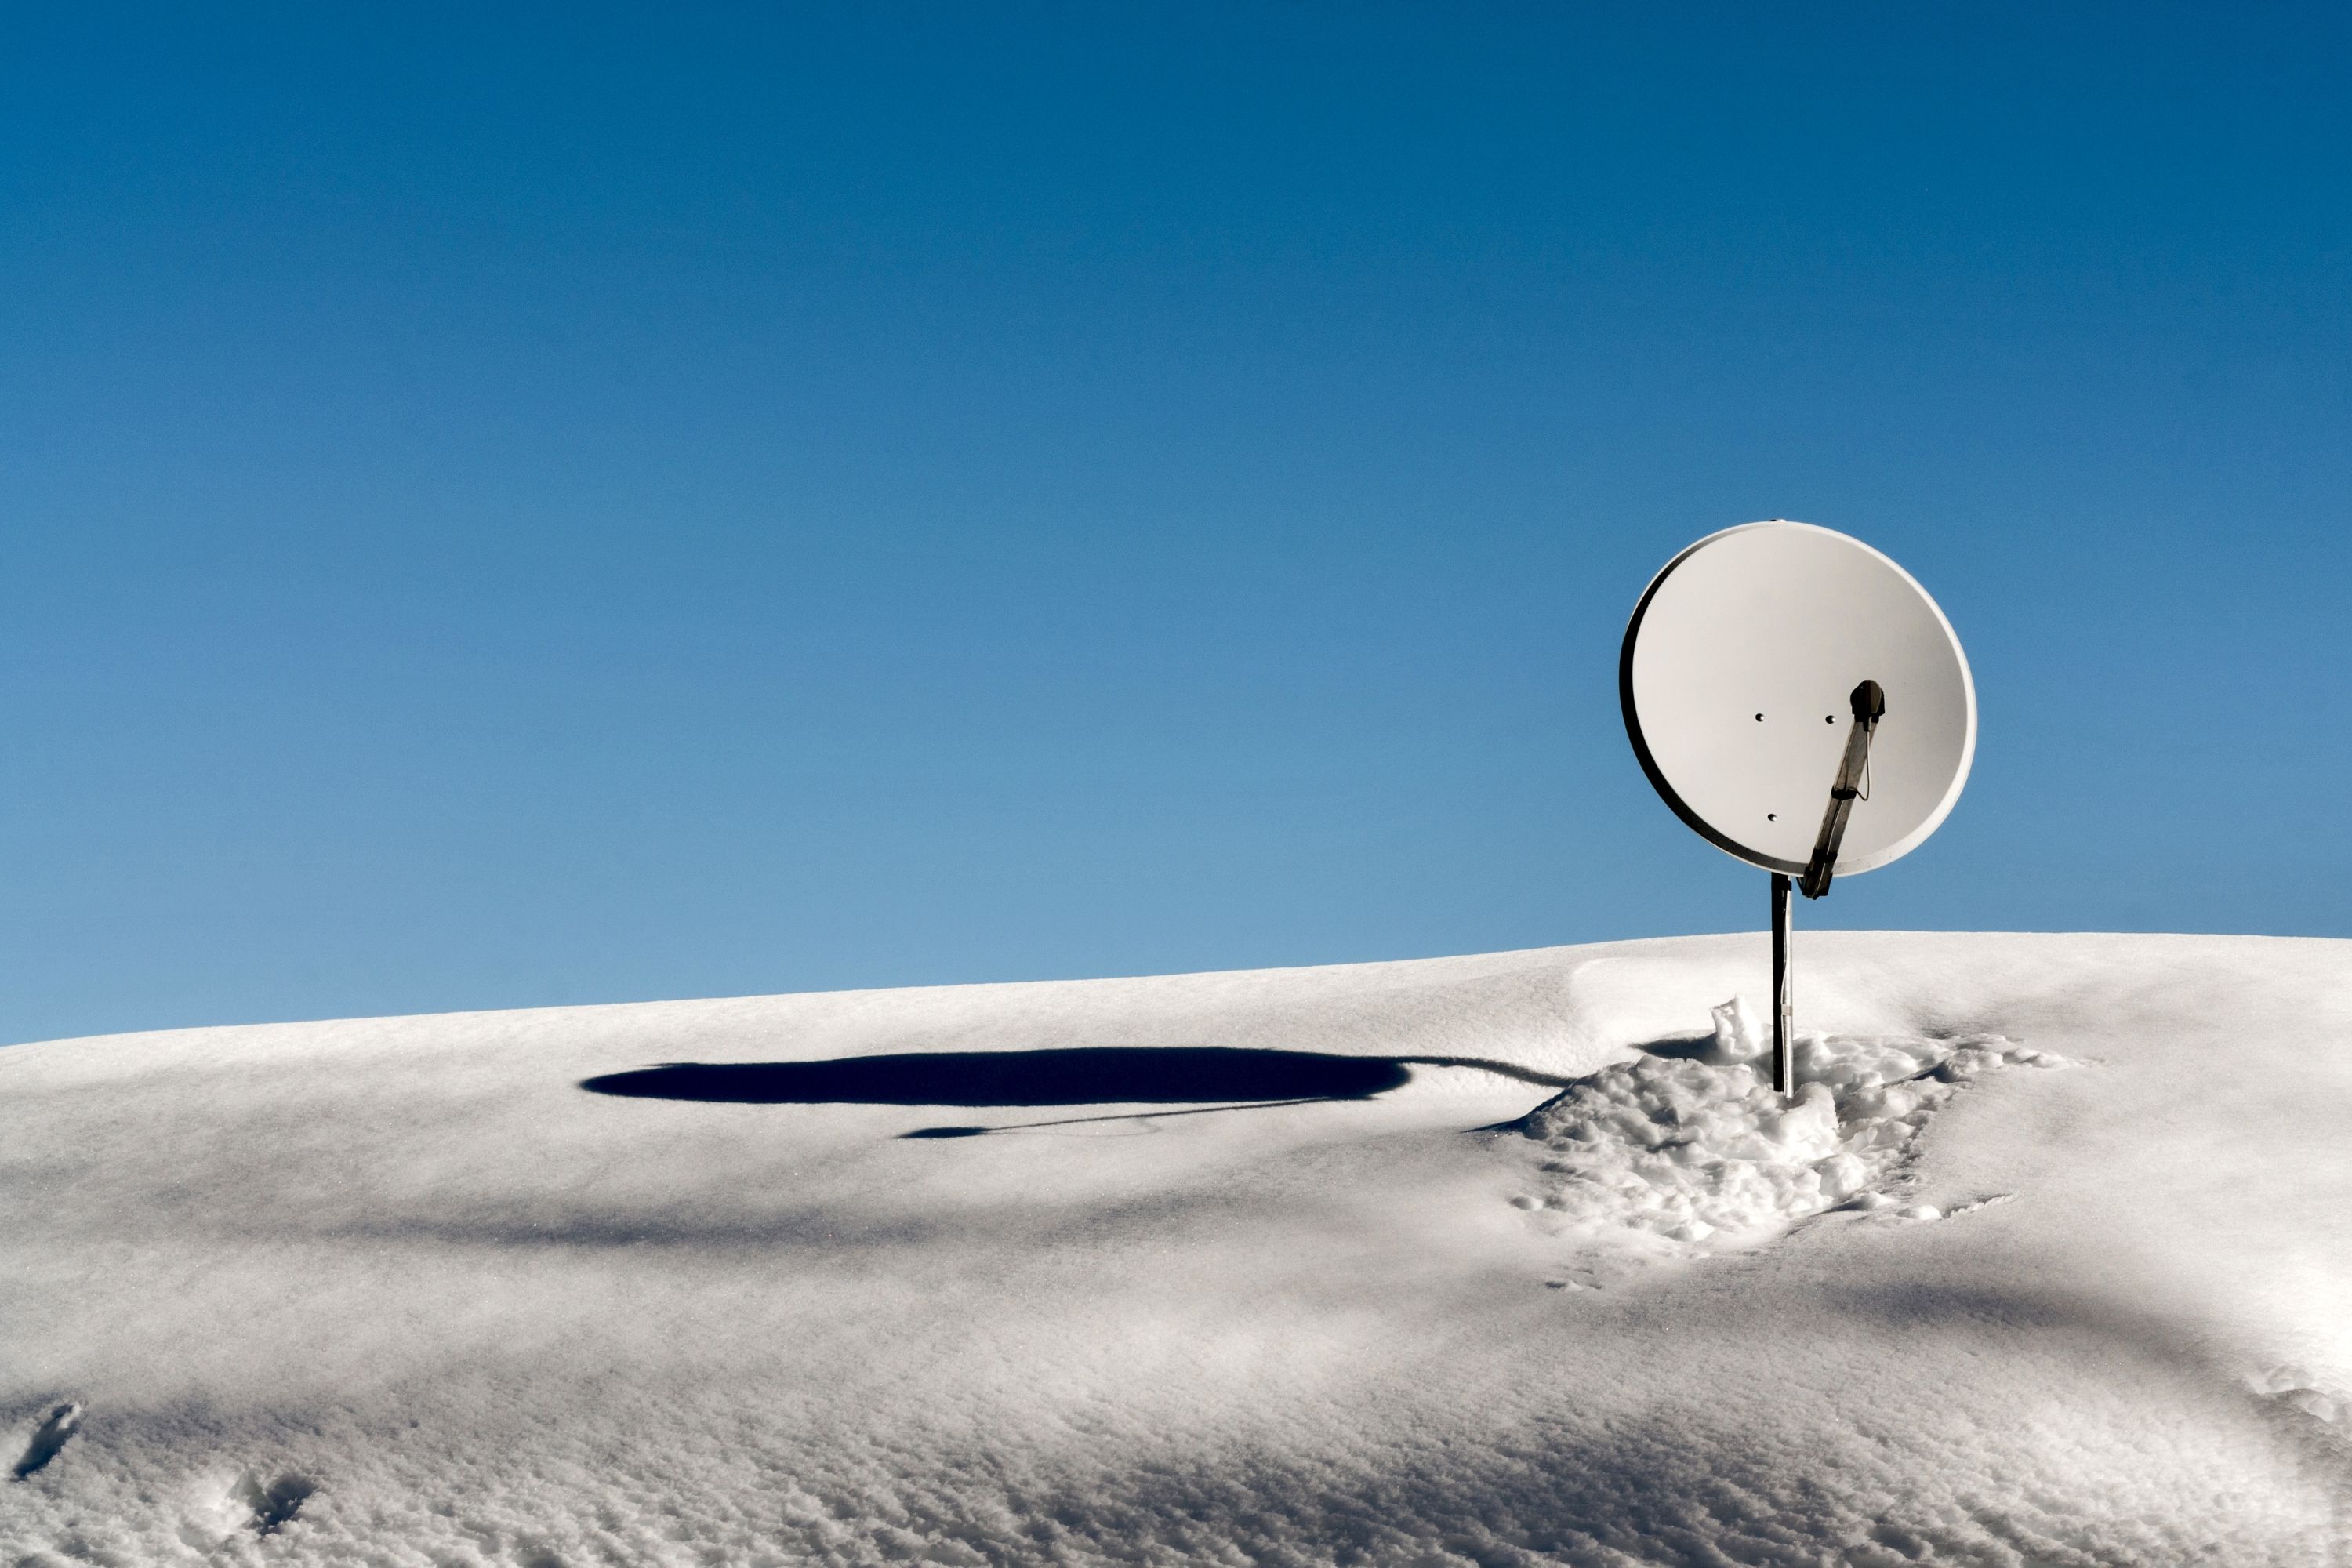 How to Get Snow Off Your Satellite Dish